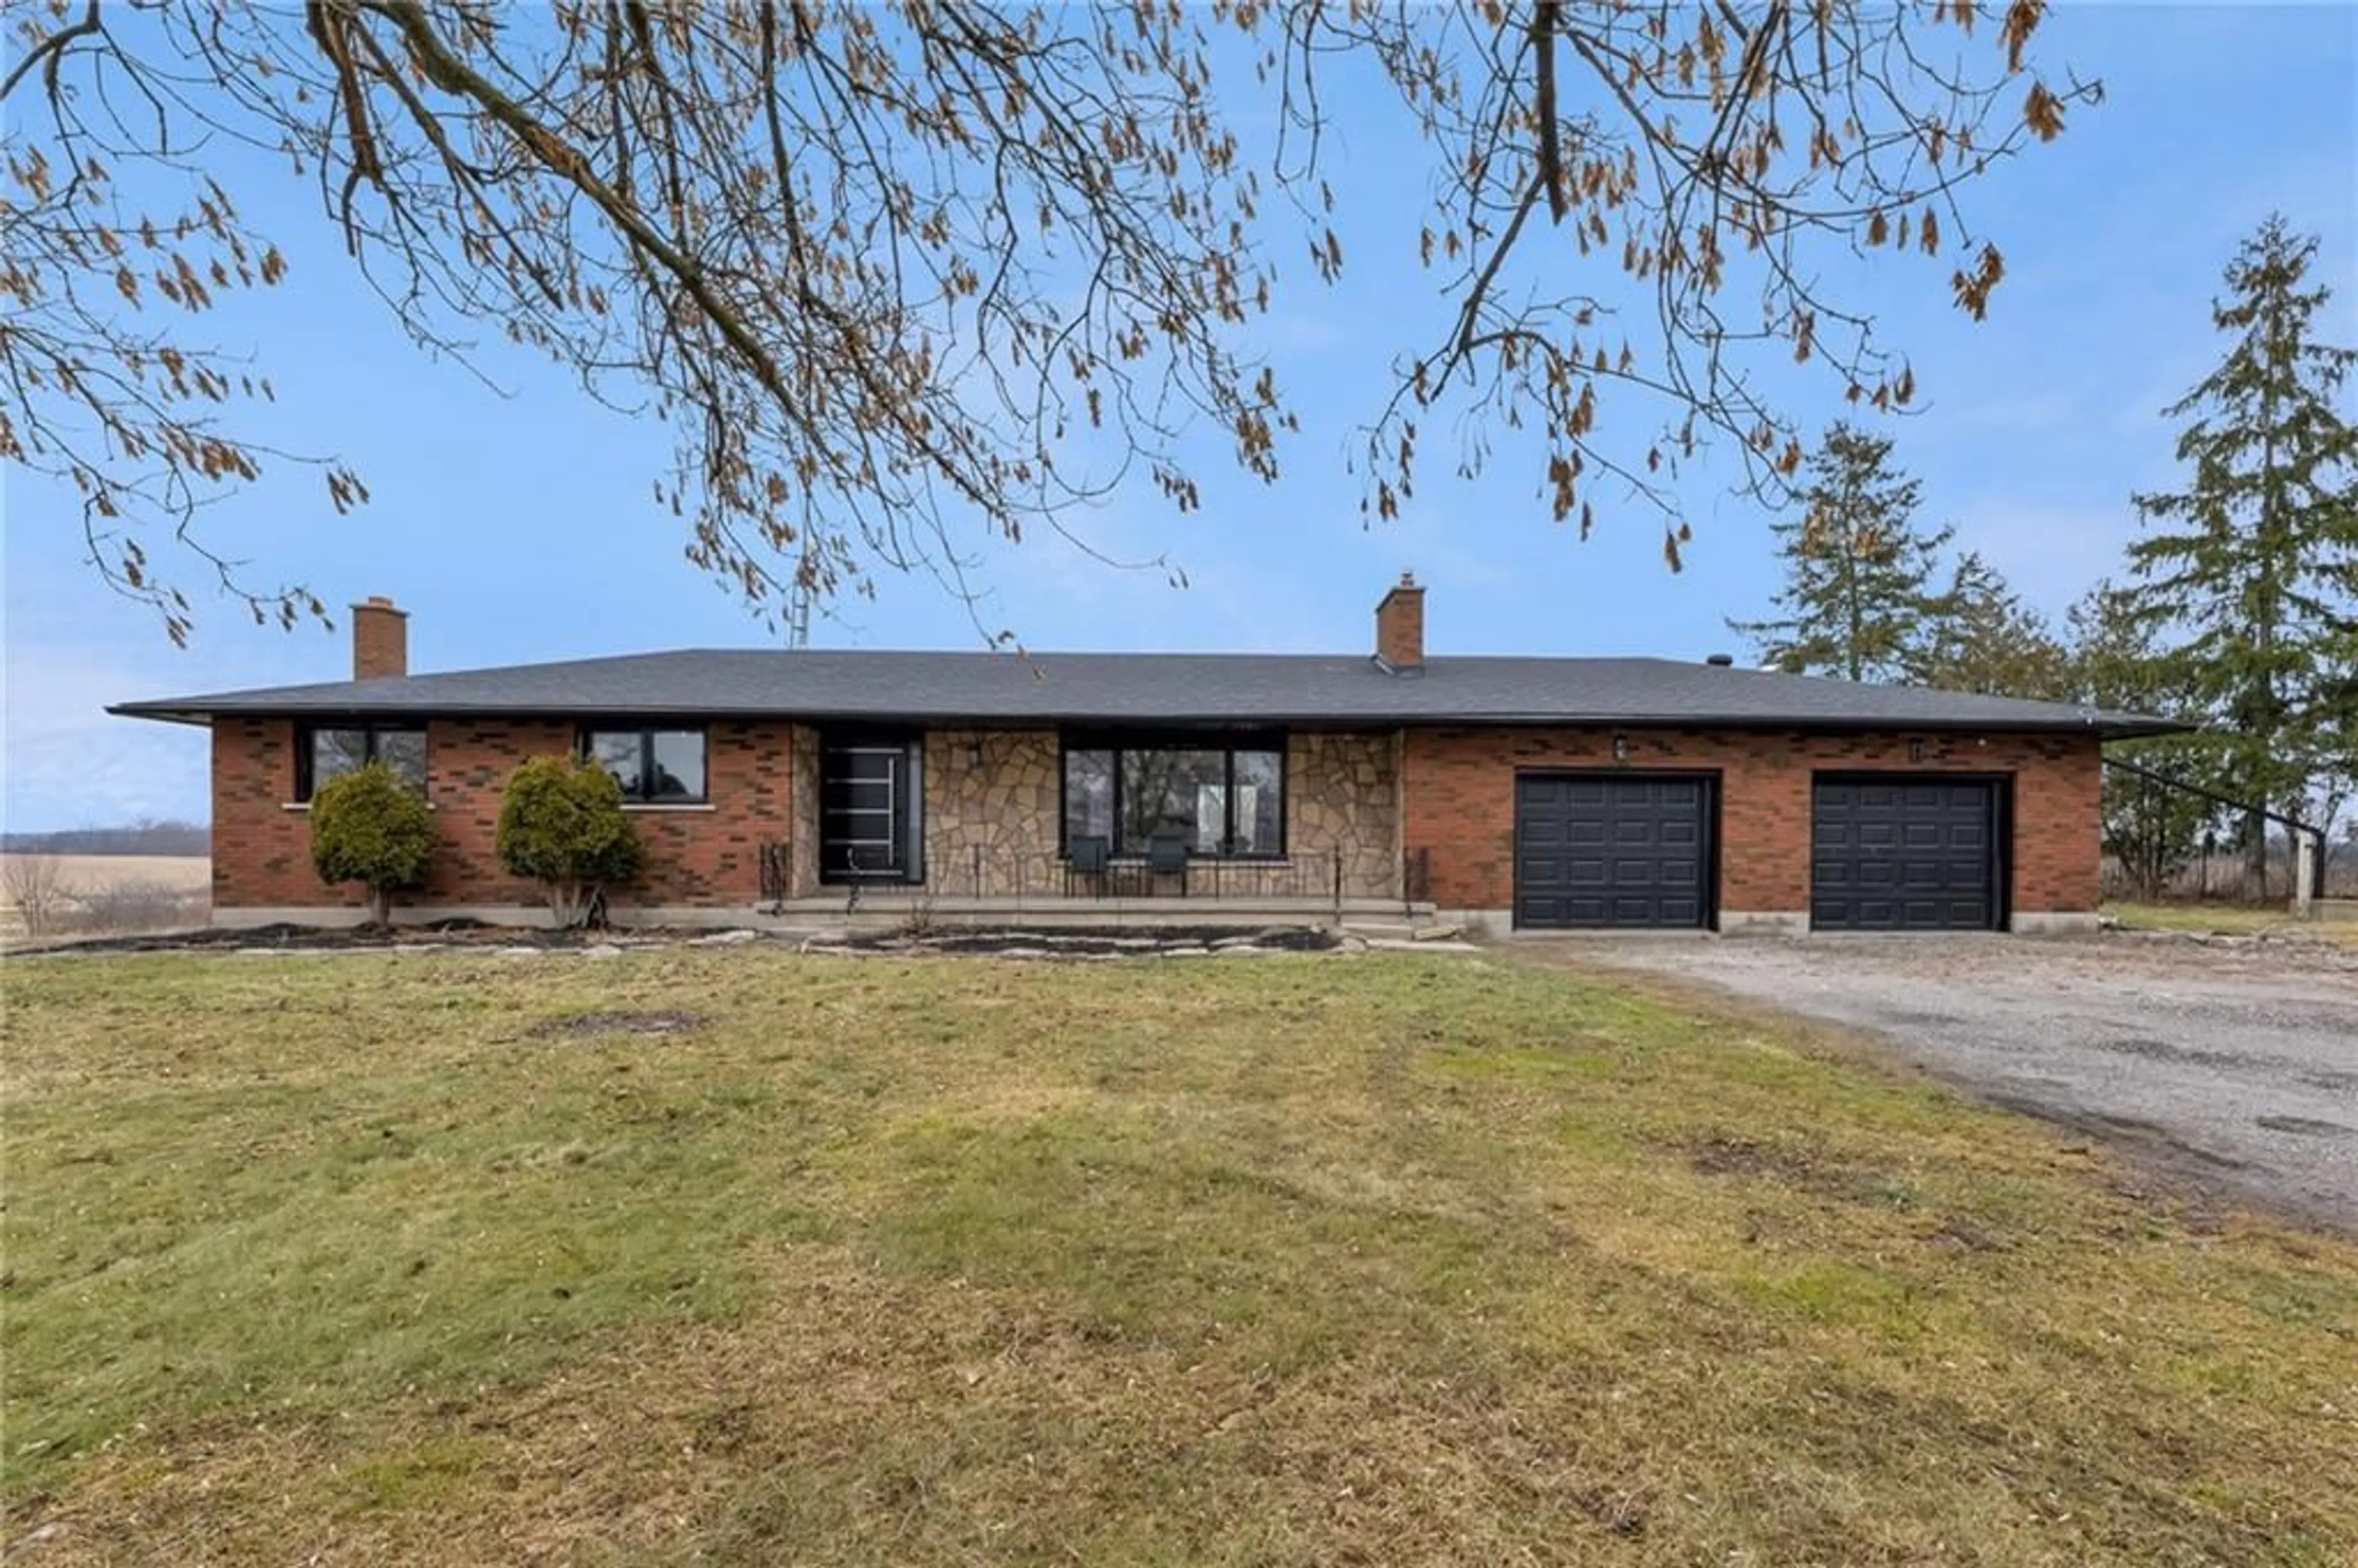 Home with brick exterior material for 9393 South Chippawa Rd, West Lincoln Ontario N0A 1C0